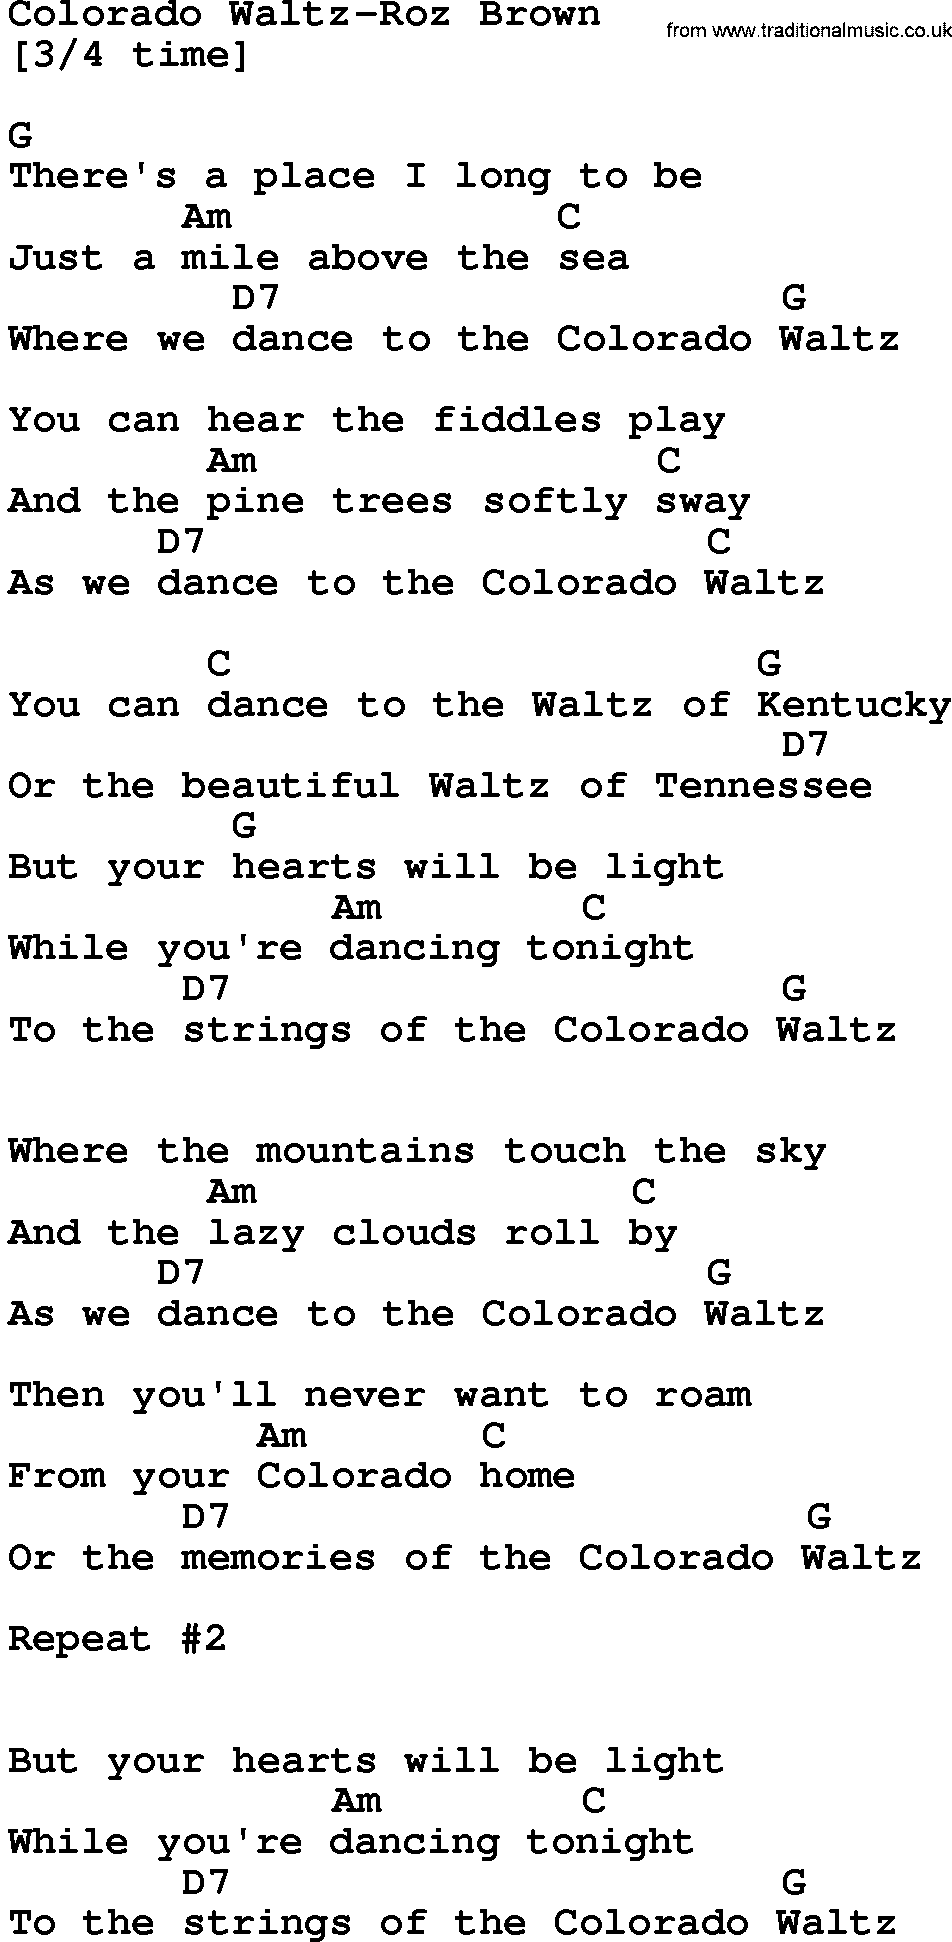 Country music song: Colorado Waltz-Roz Brown lyrics and chords